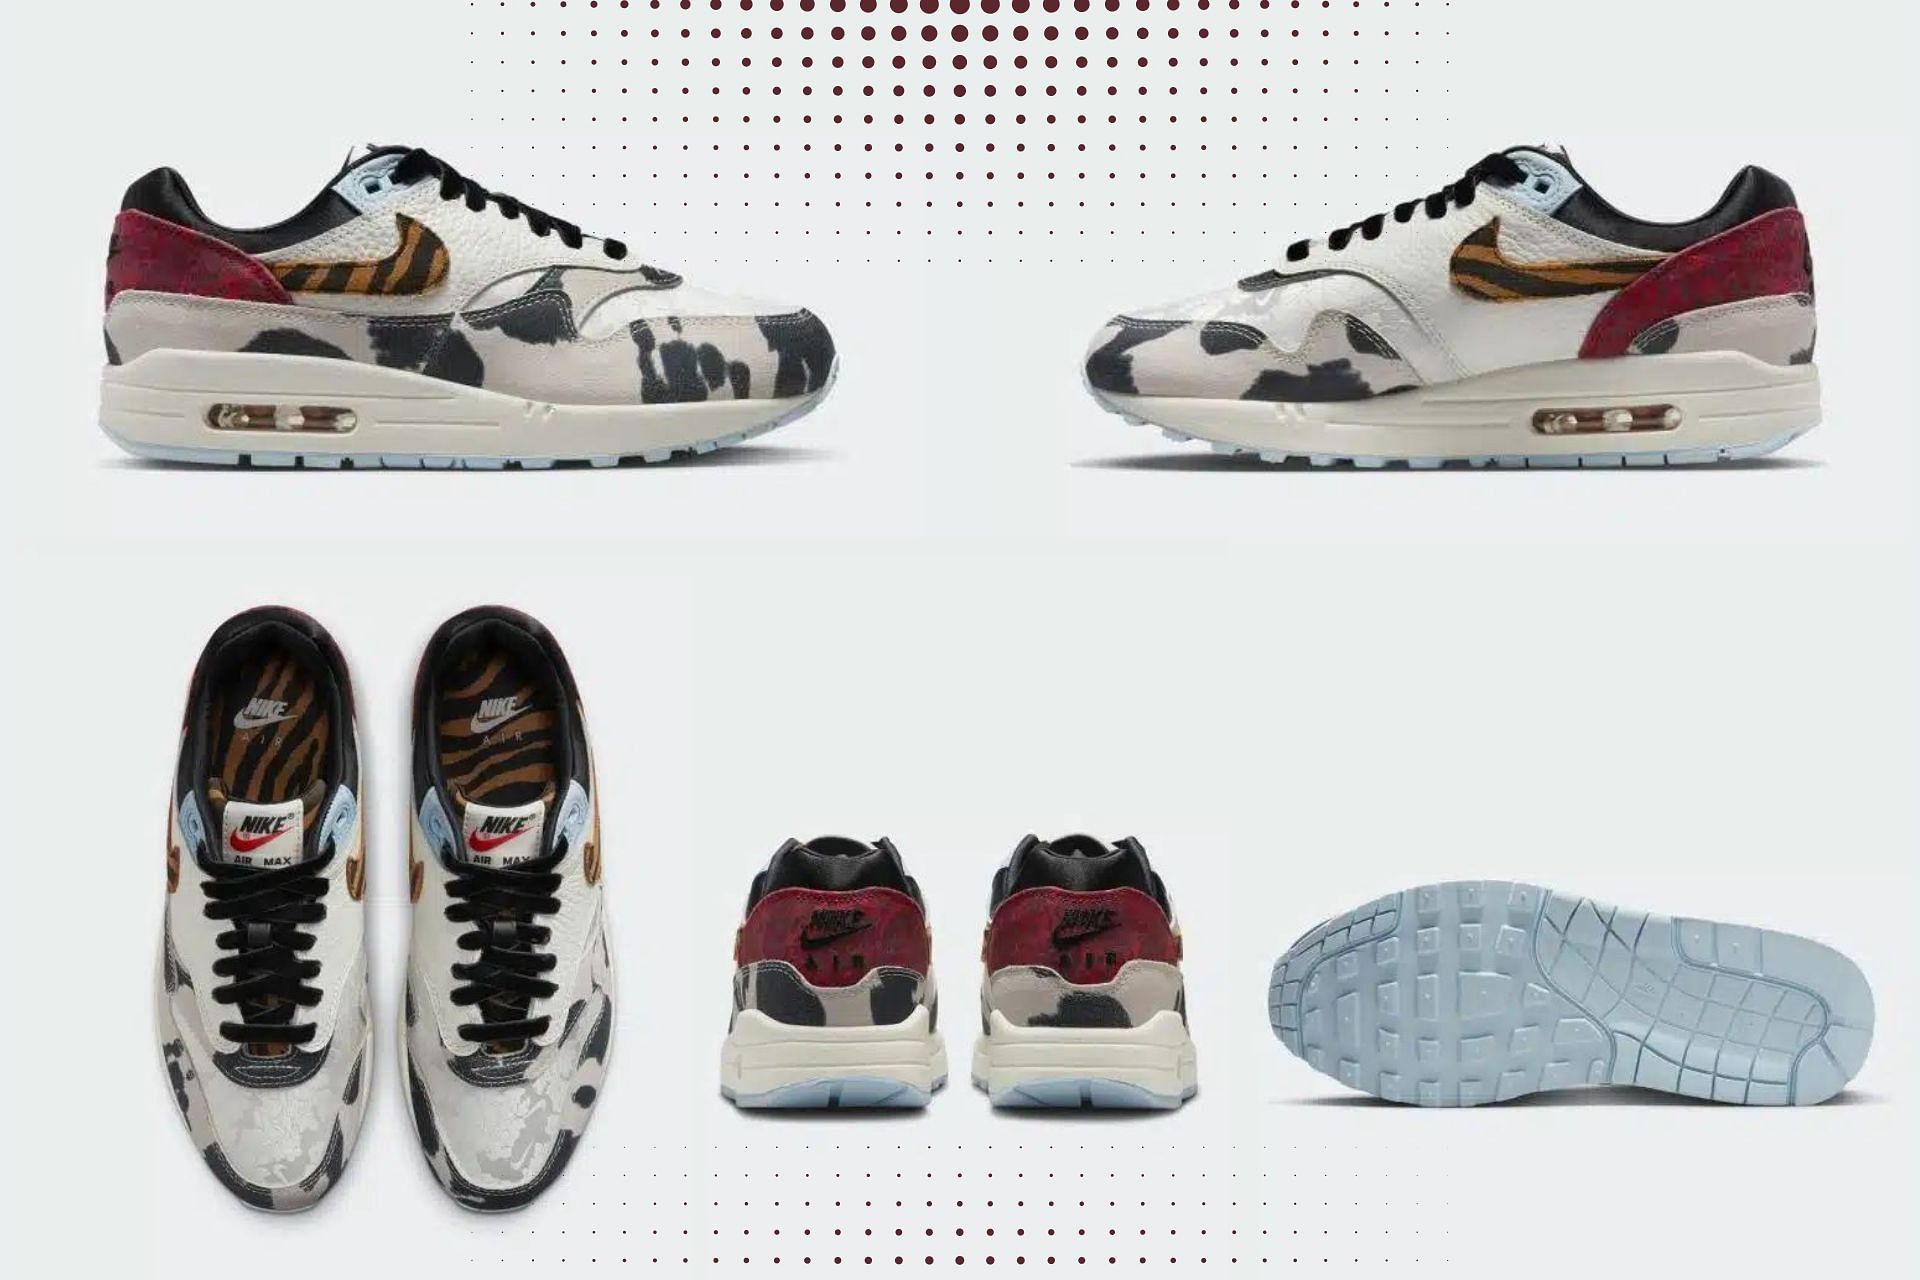 The upcoming Nike Air Max 1 &quot;Tiger Swoosh&quot; sneakers come featured with a mix of wild animal prints (Image via Sportskeeda)